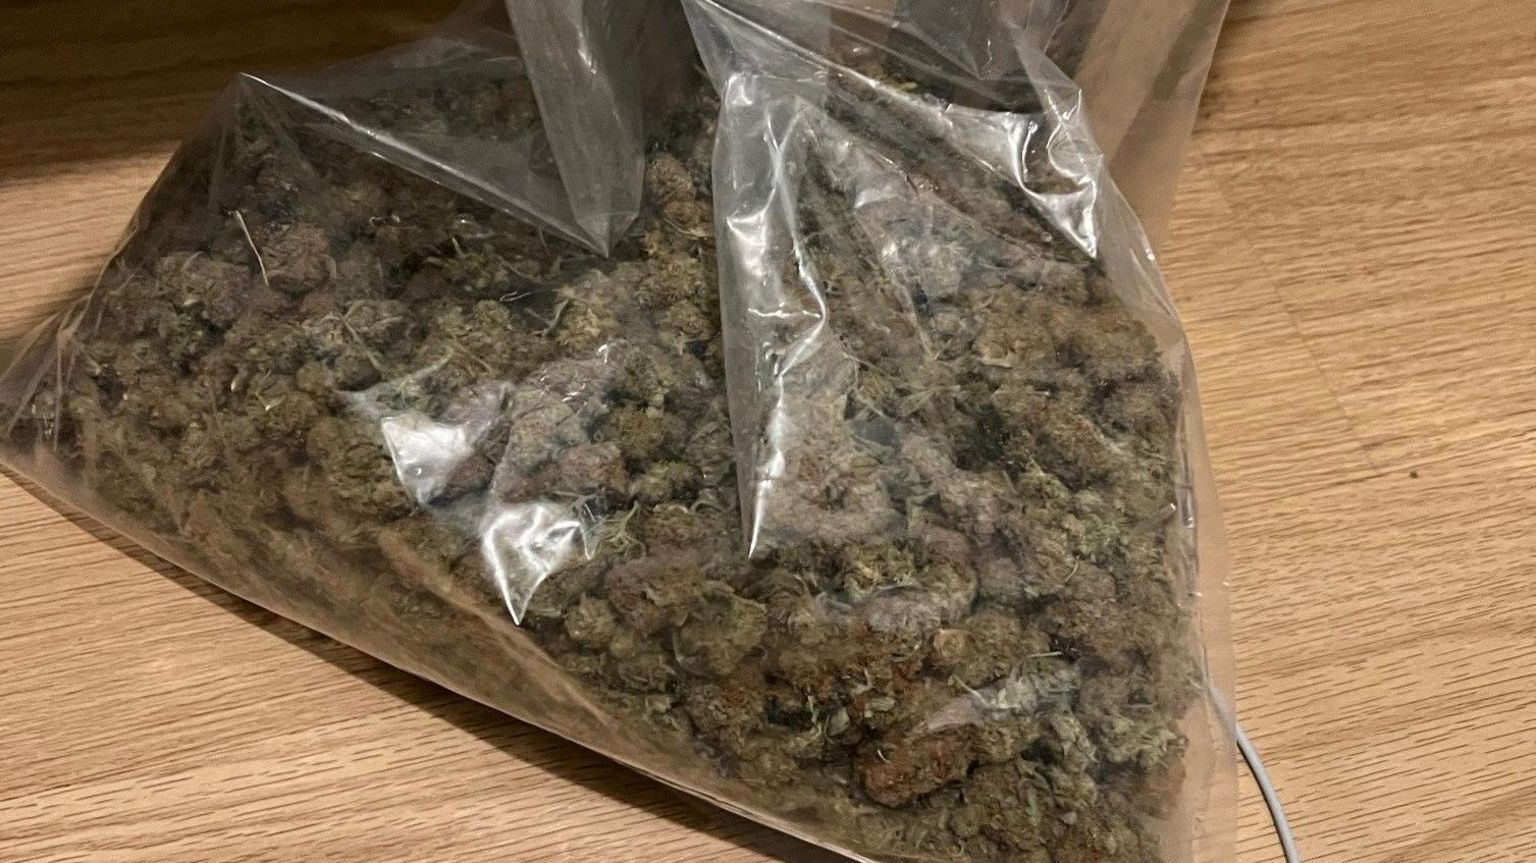 Drugs found by police in Luton 